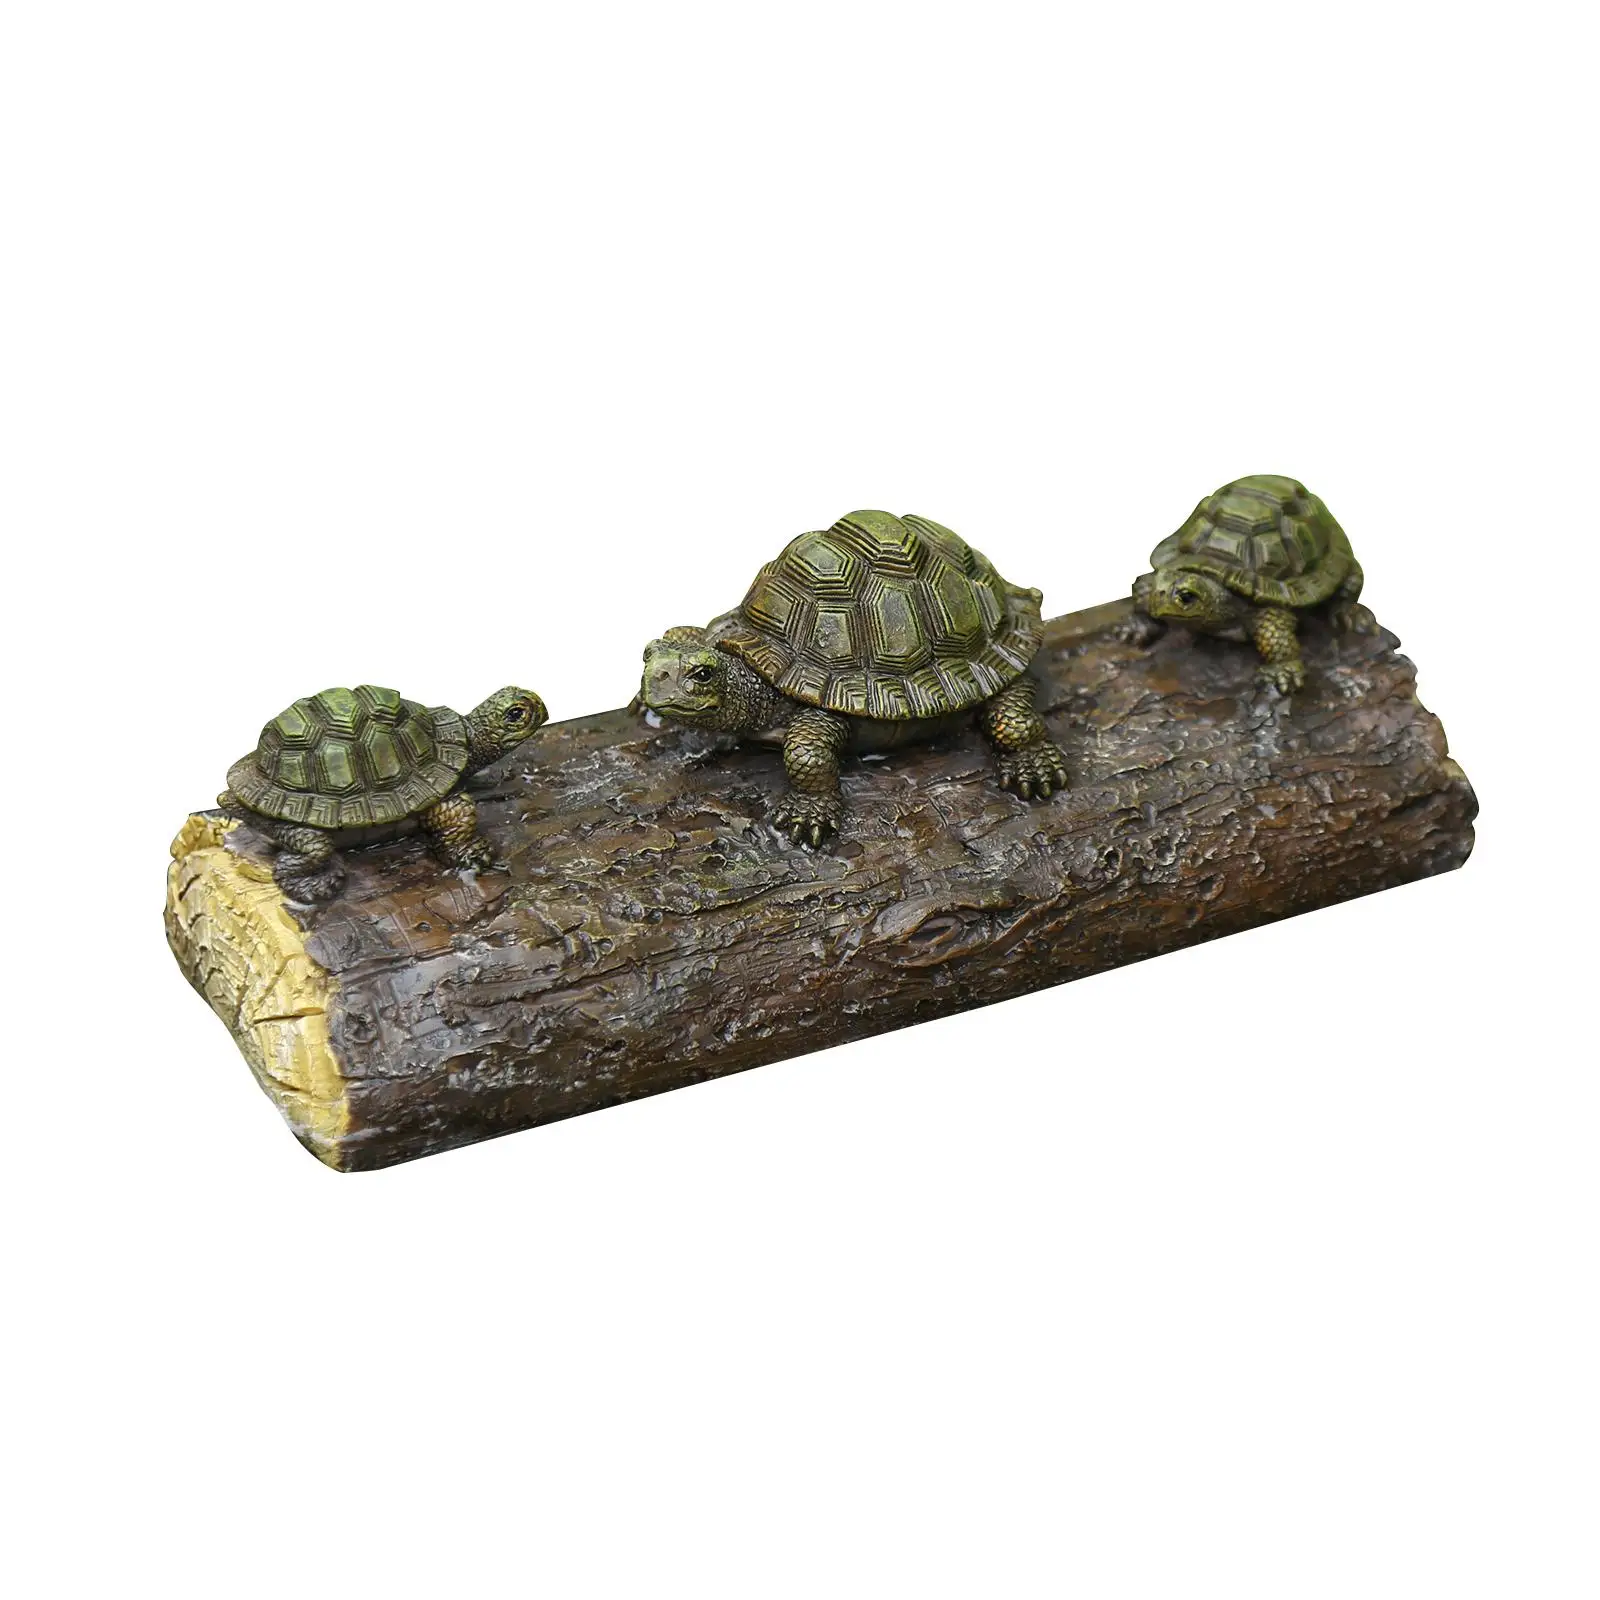 Water Floating Turtle Ornament Animal Figurines Garden Statue Photo Props Resin